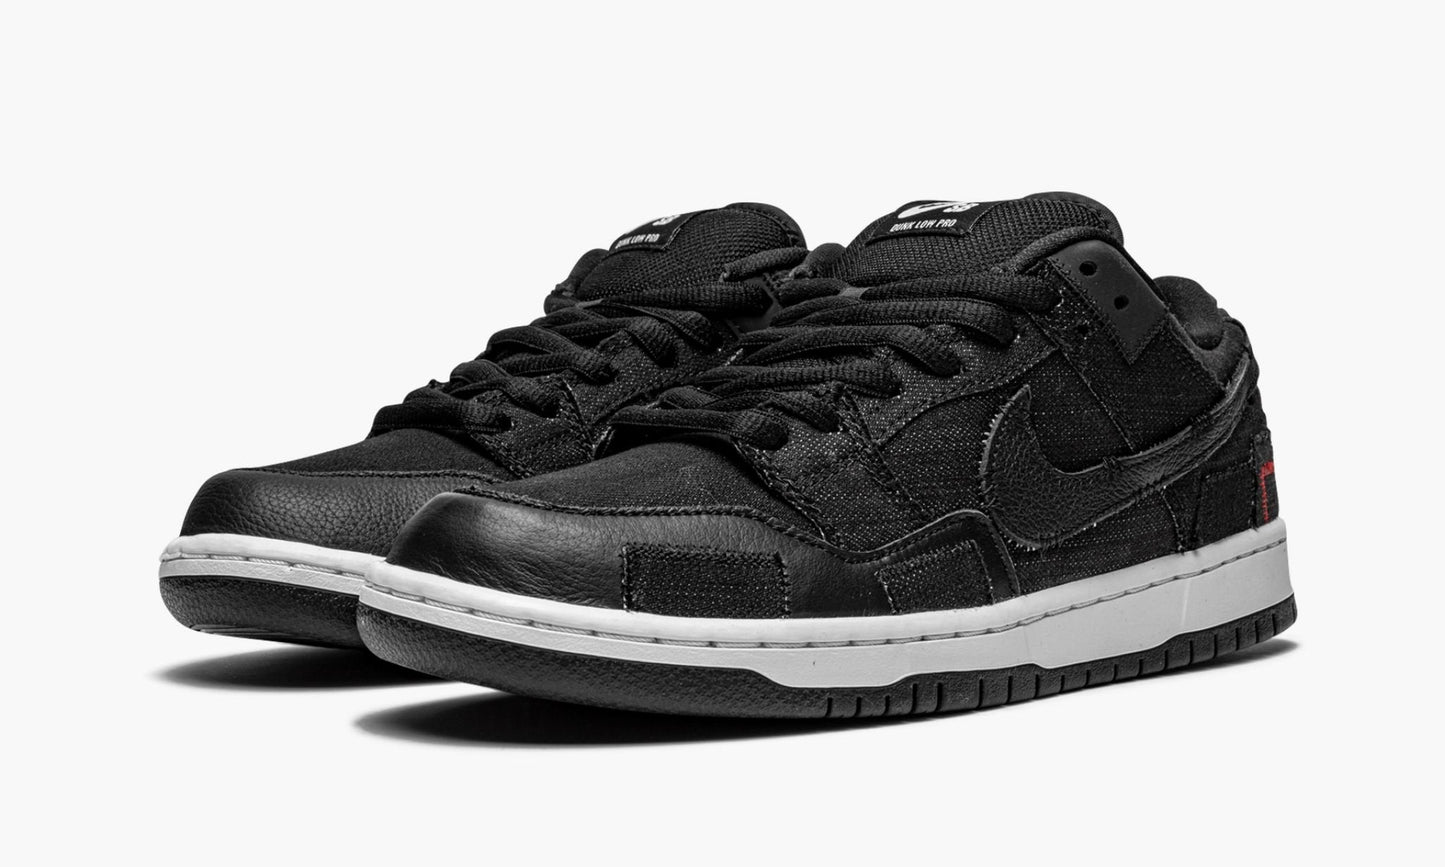 SB Dunk Low "Wasted Youth - Special Box"